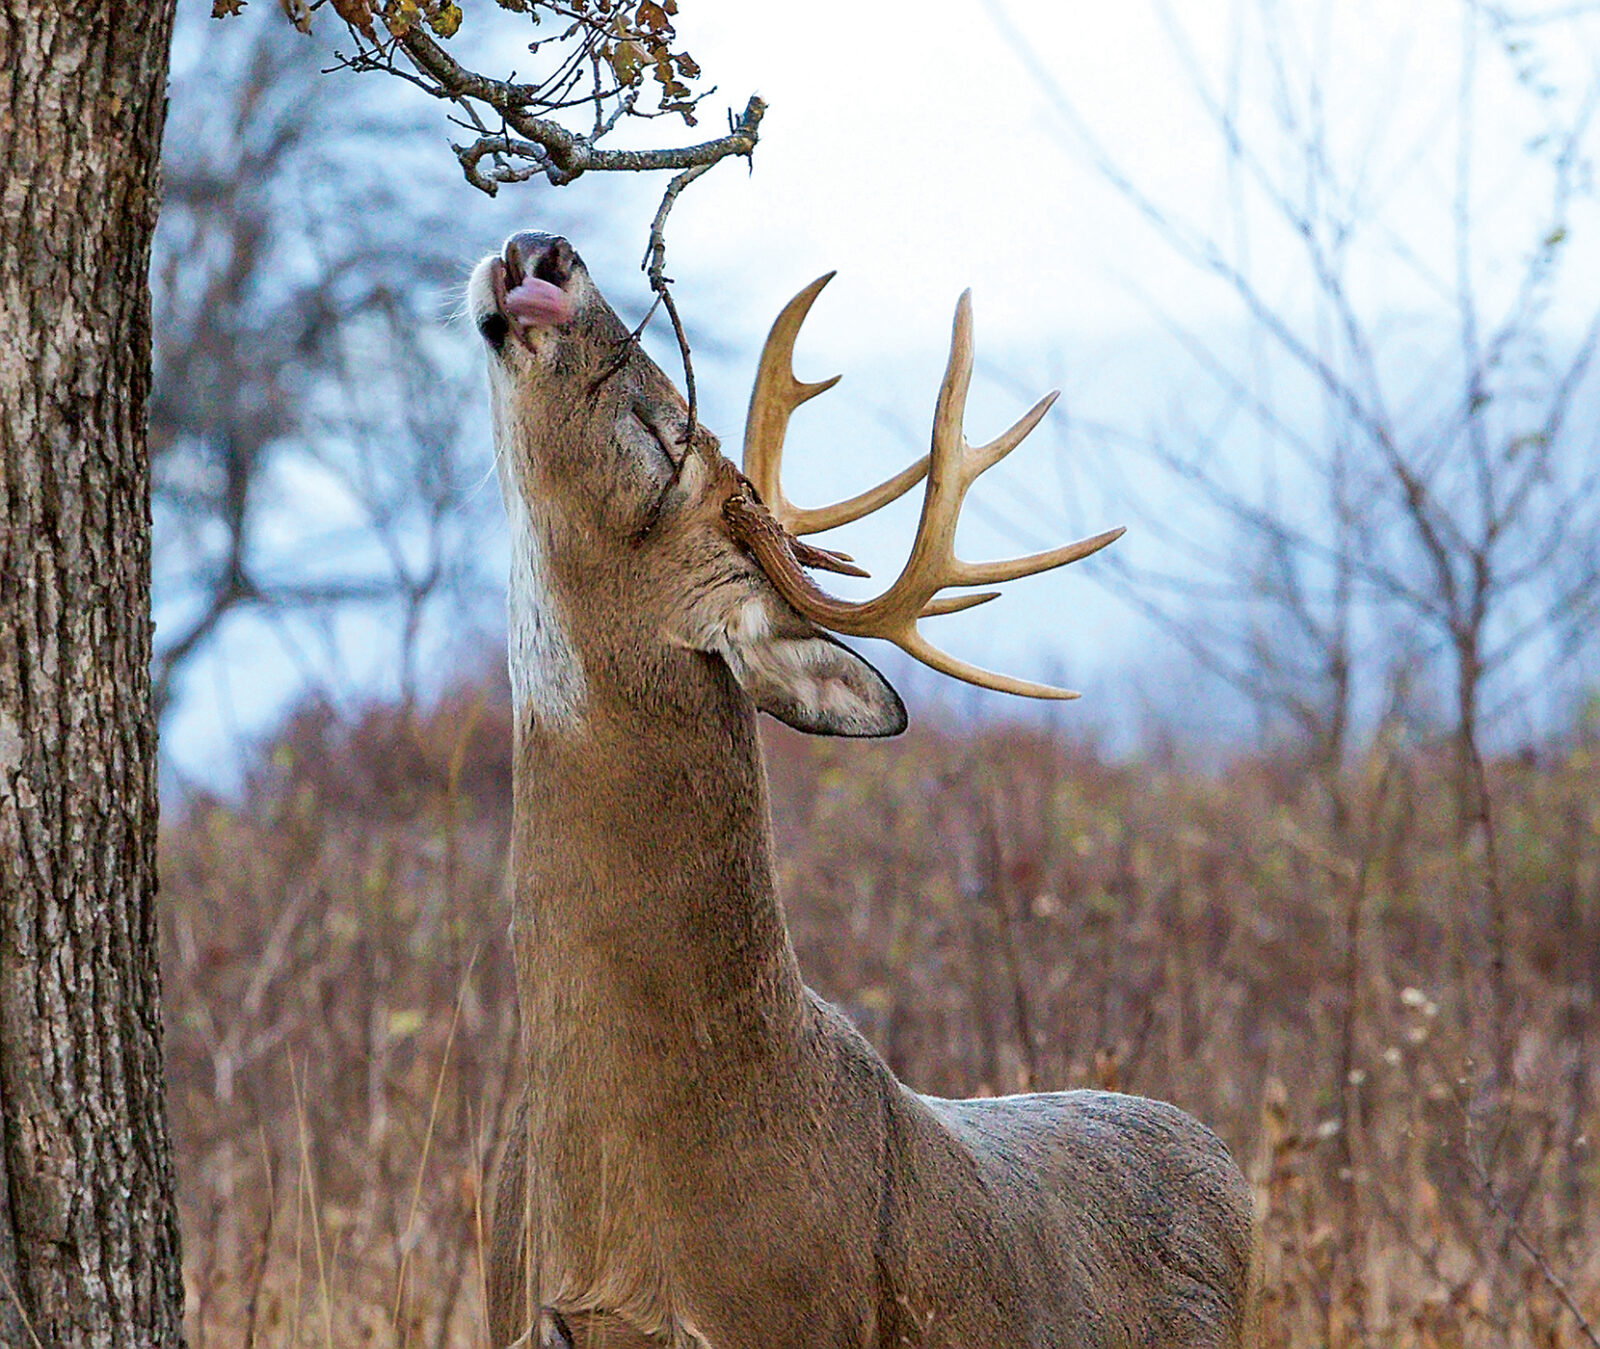 A deer scratching it's face using a tree branch